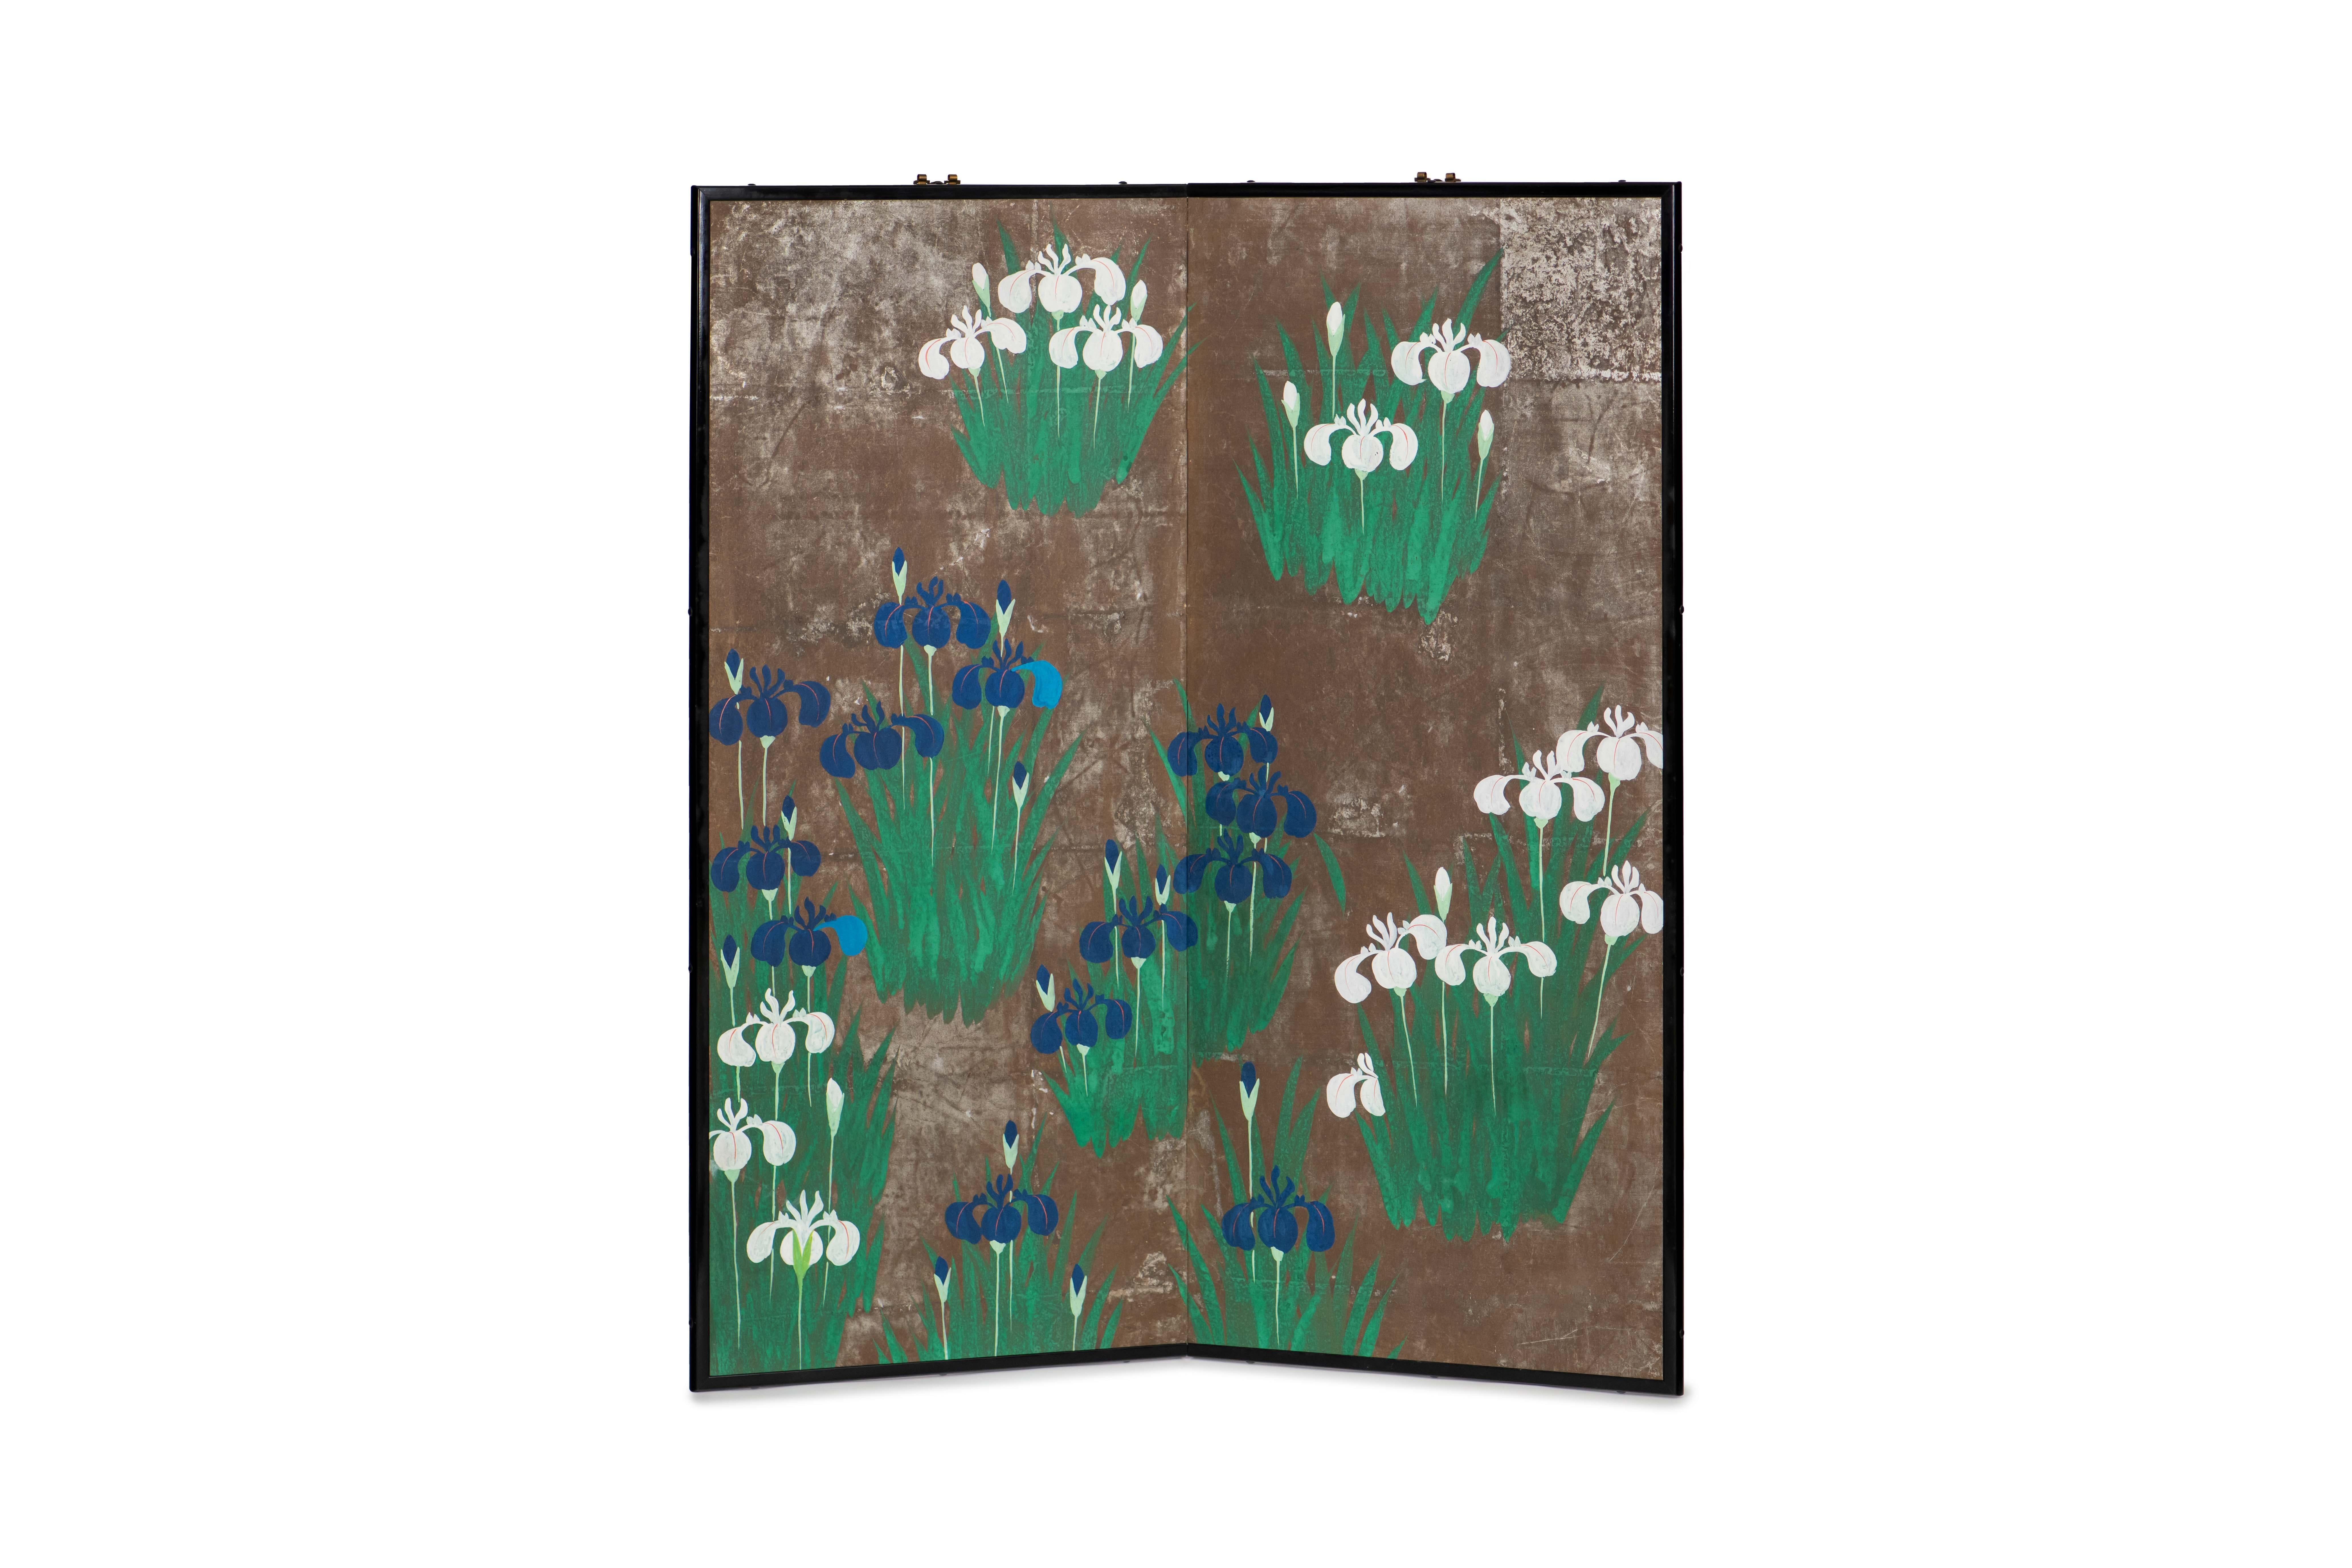 The irises painting of this two-panel screen is hand-painted in watercolor, on squares of silver leaf which are applied by hand to the paper base over carefully jointed wooden lattice frames. Lacquer rails are then applied to the perimeter to finish